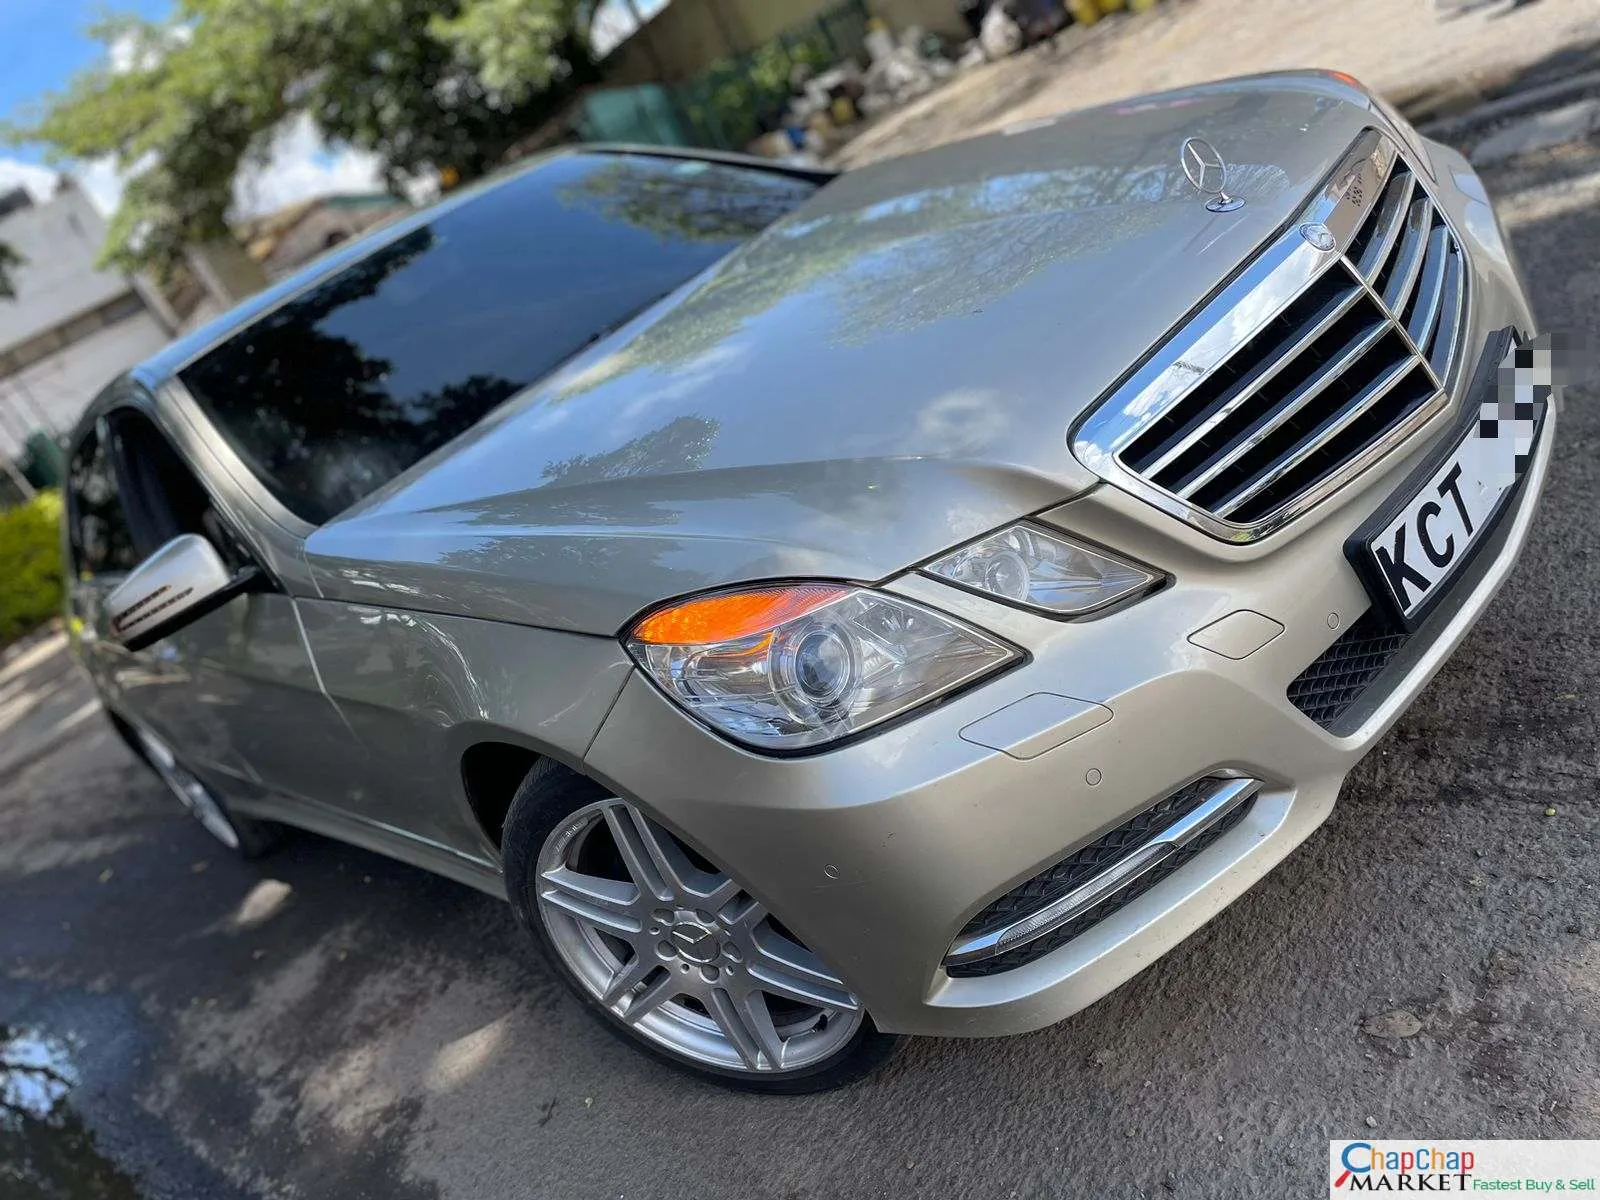 Cars Cars For Sale/Vehicles-Mercedes Benz E250 SUNROOF QUICK SALE You Pay 30% DEPOSIT Trade in OK 15